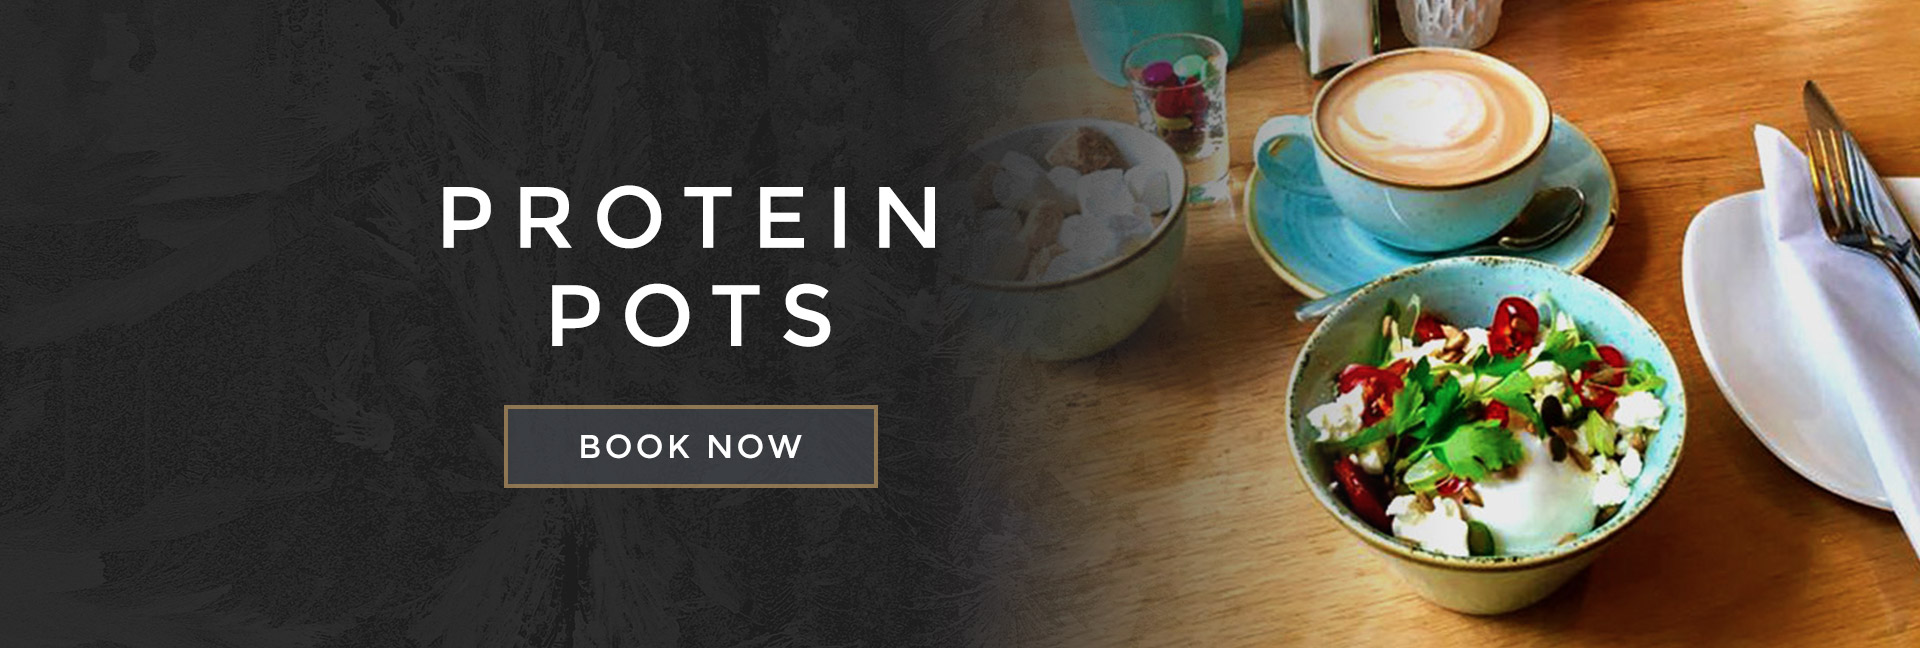 Protein pots at ABO Virtual - Book your table